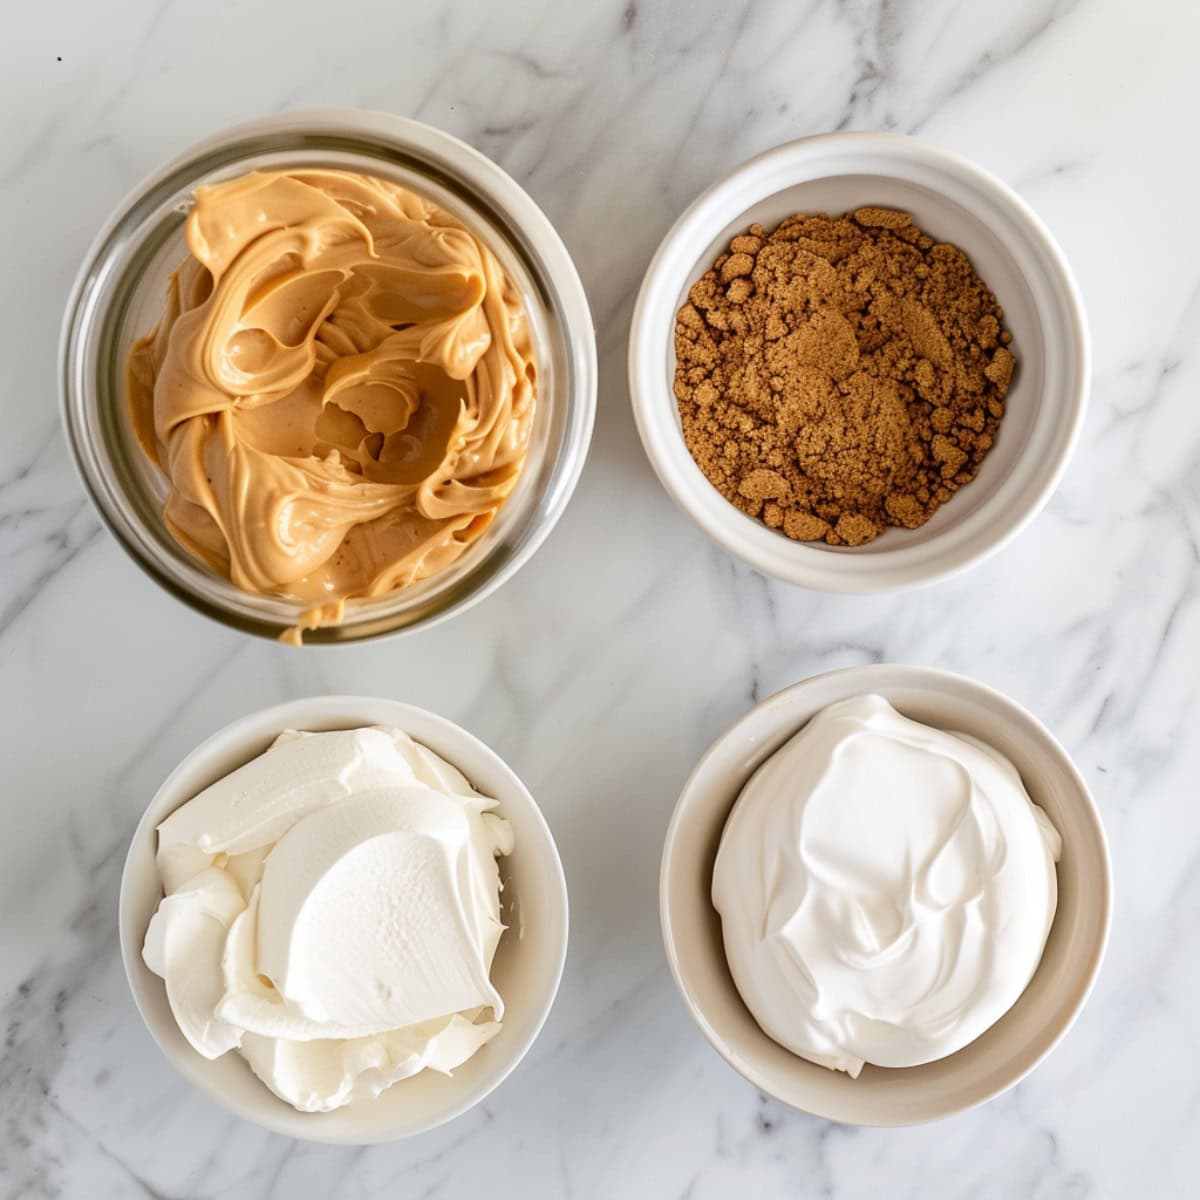 Peanut butter, brown sugar, whipped cream and heavy cream in bowls on a white marble table.